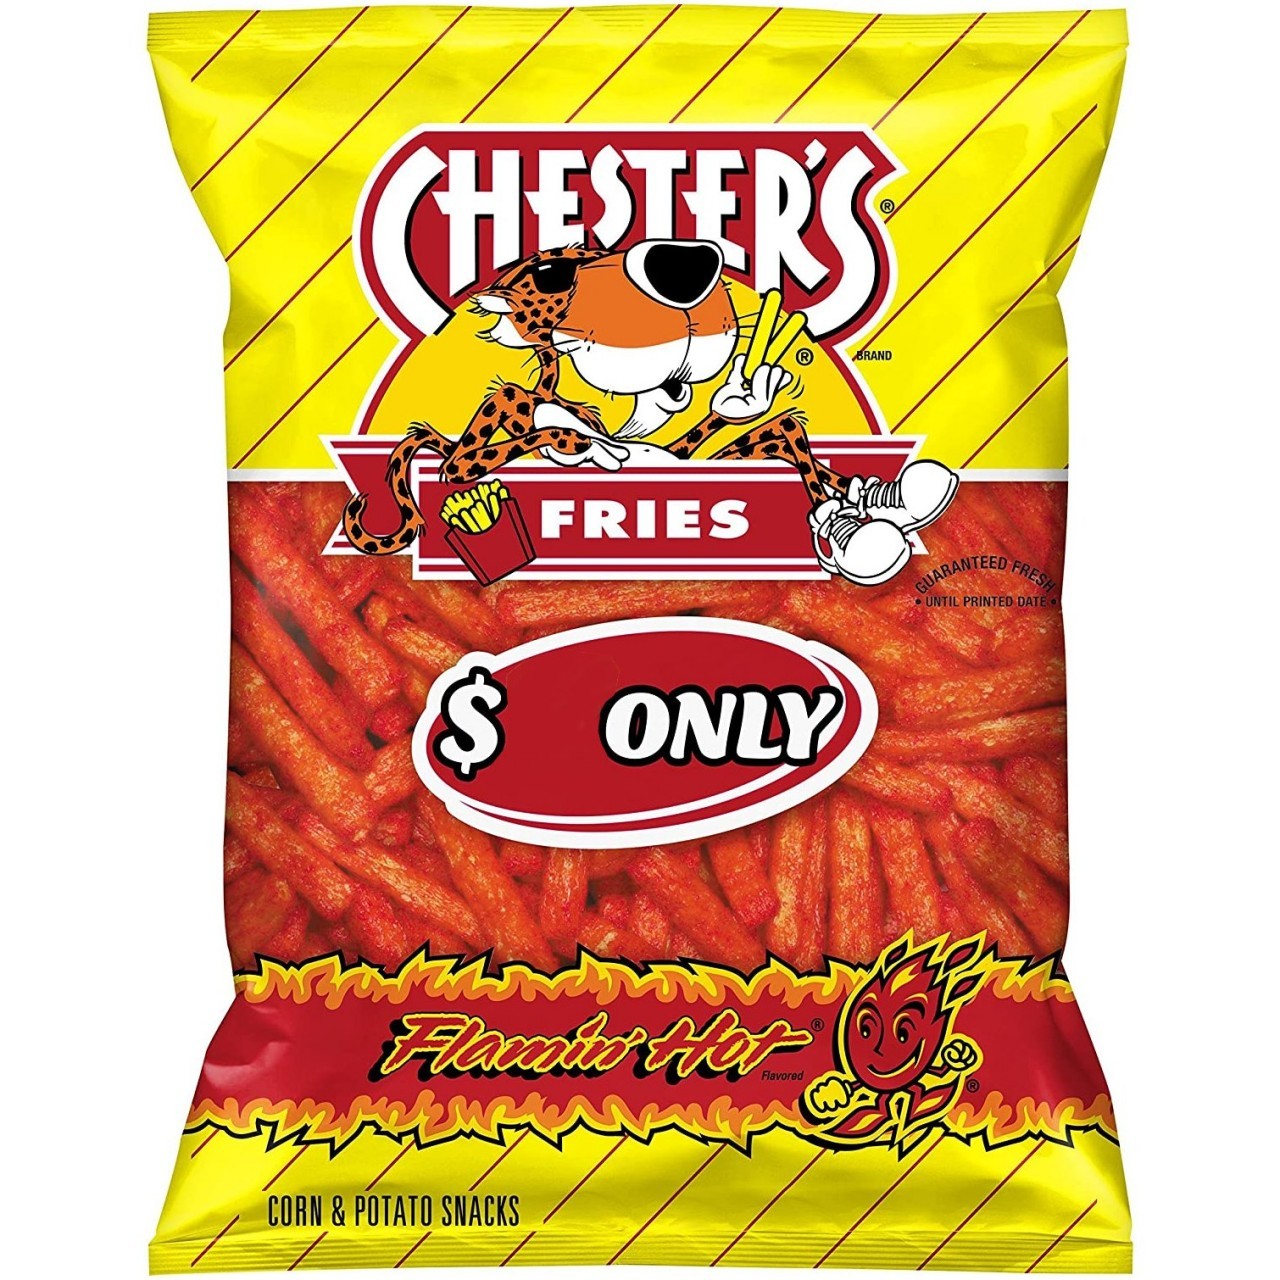 CHESTERS FRIES FLAMIN HOT 6oz